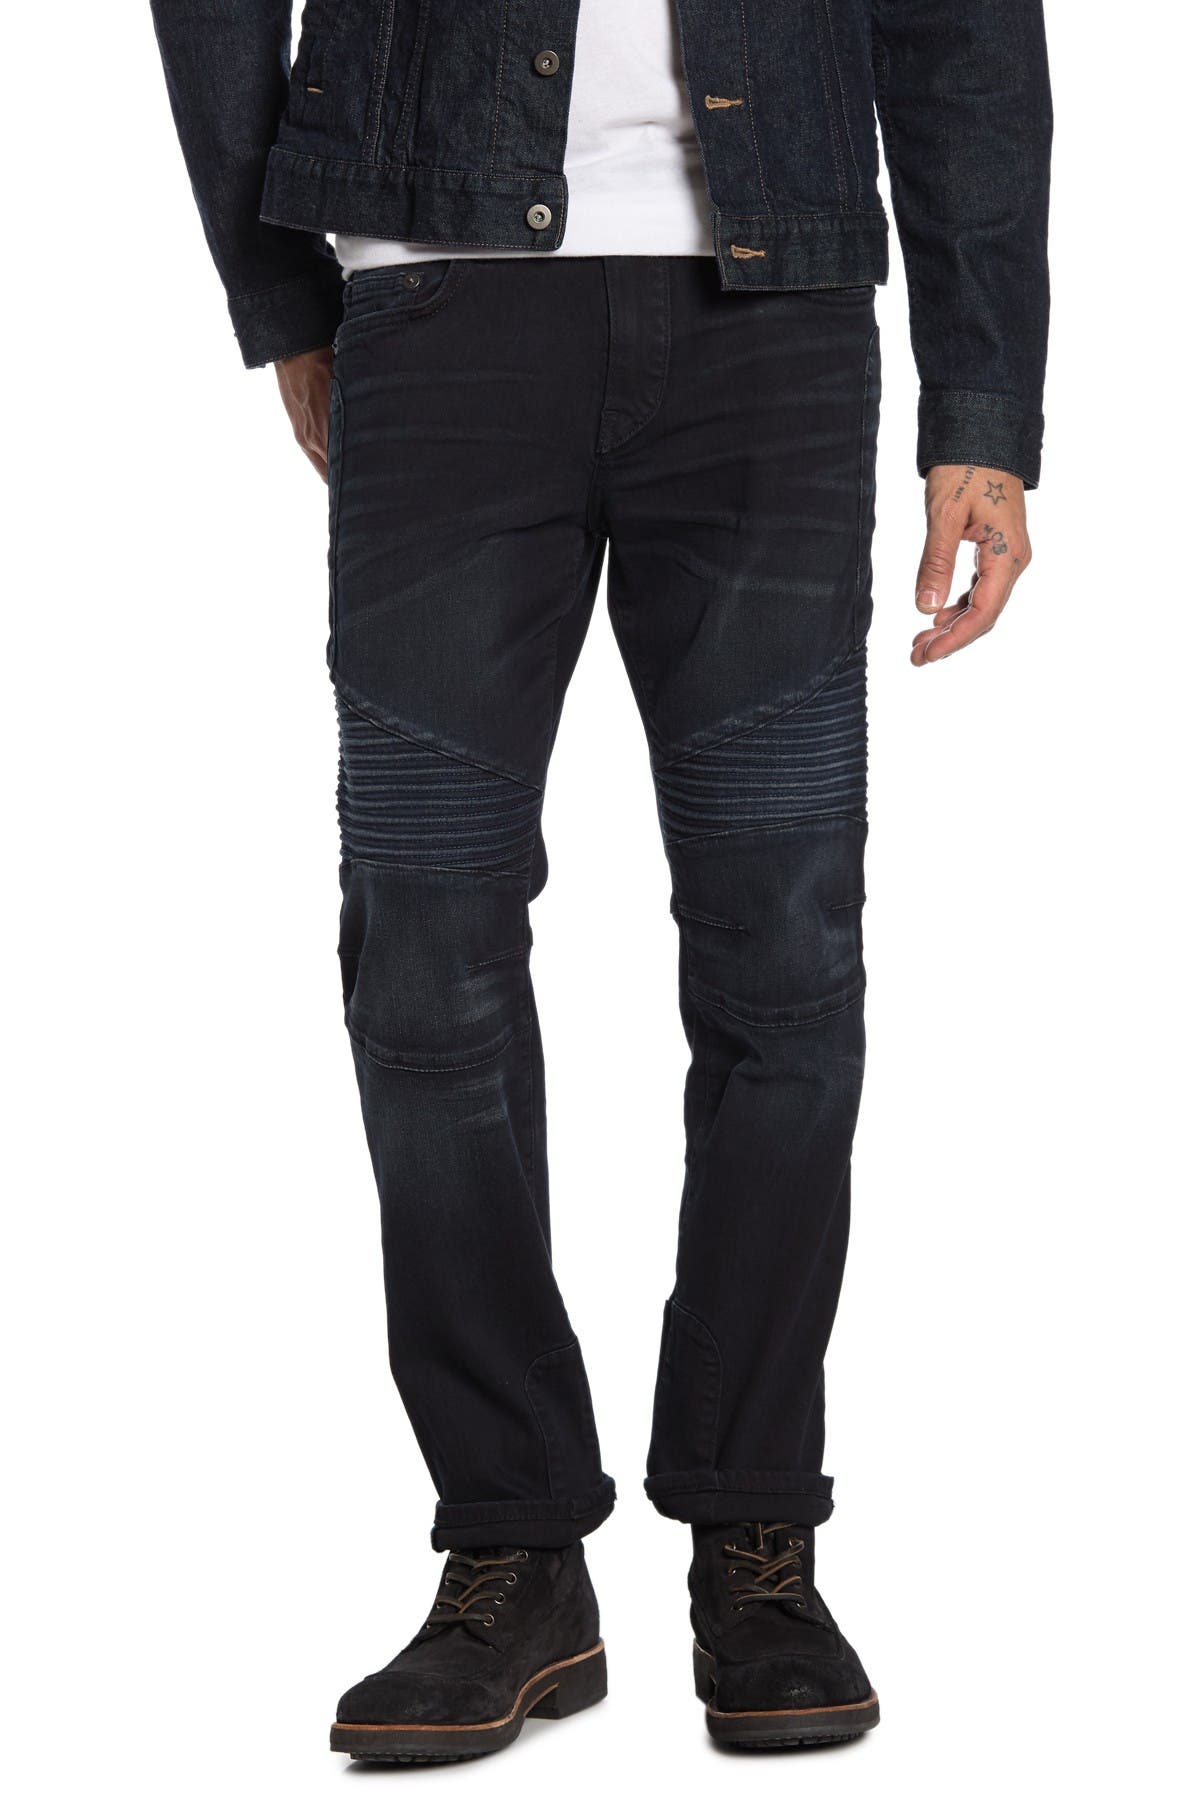 true religion rocco moto relaxed skinny jeans